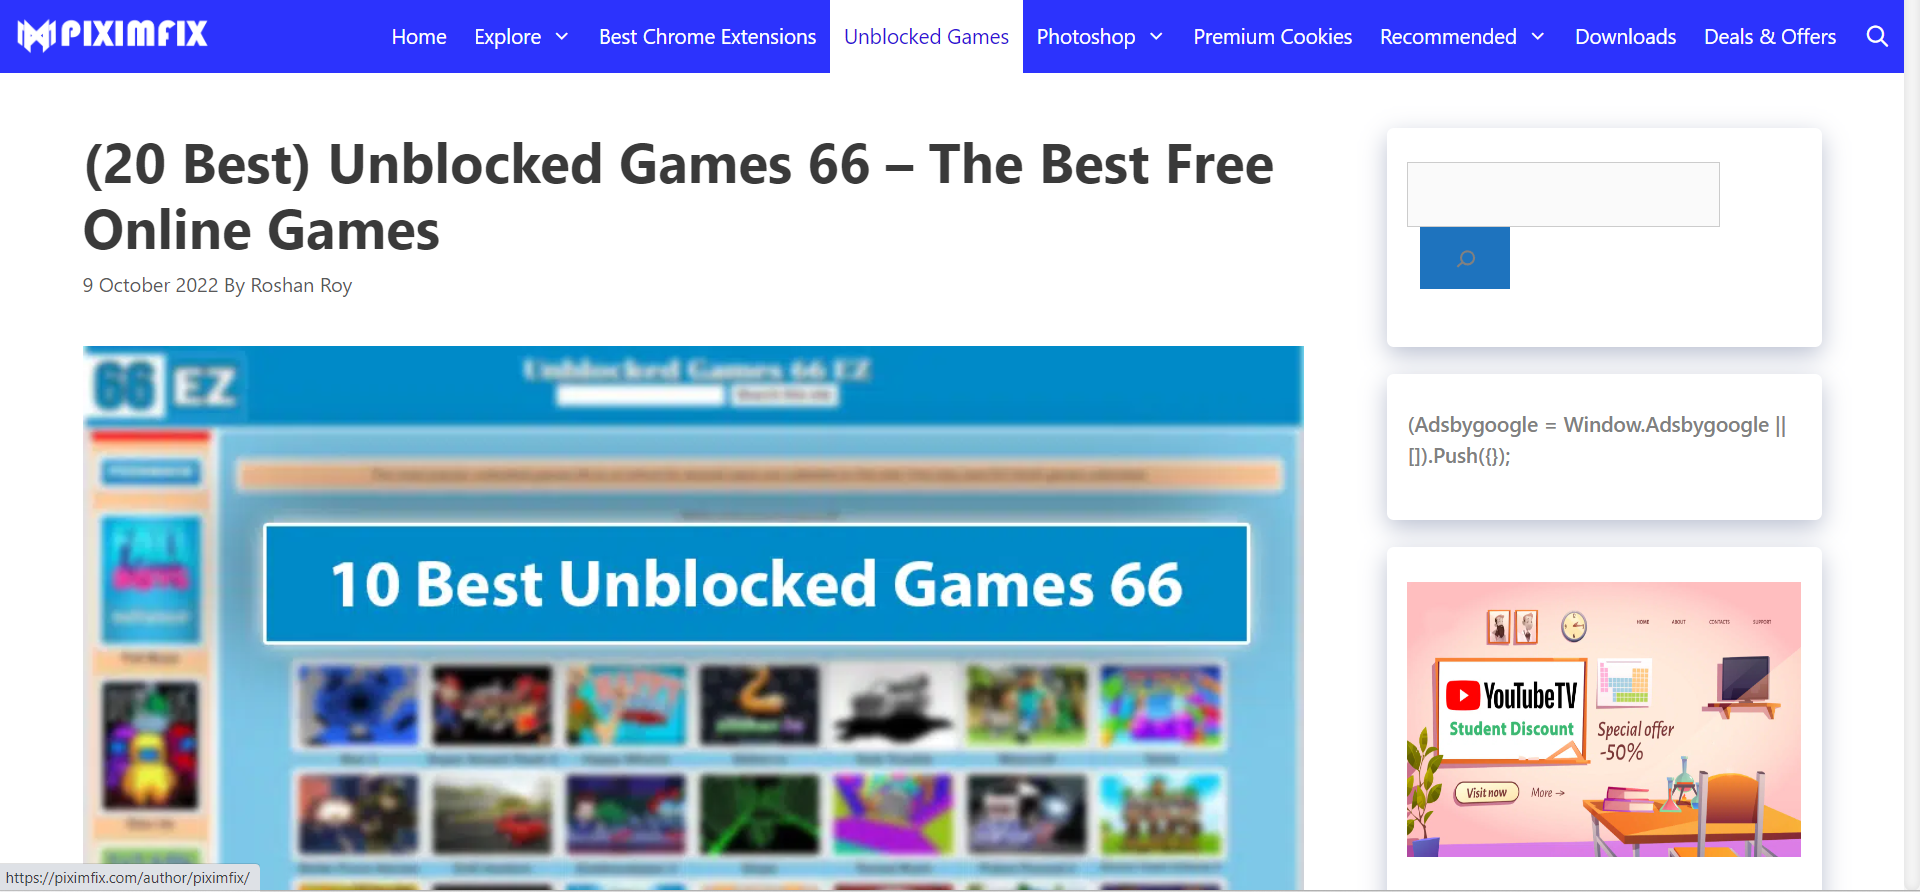 Play unblocked games 66 Online 